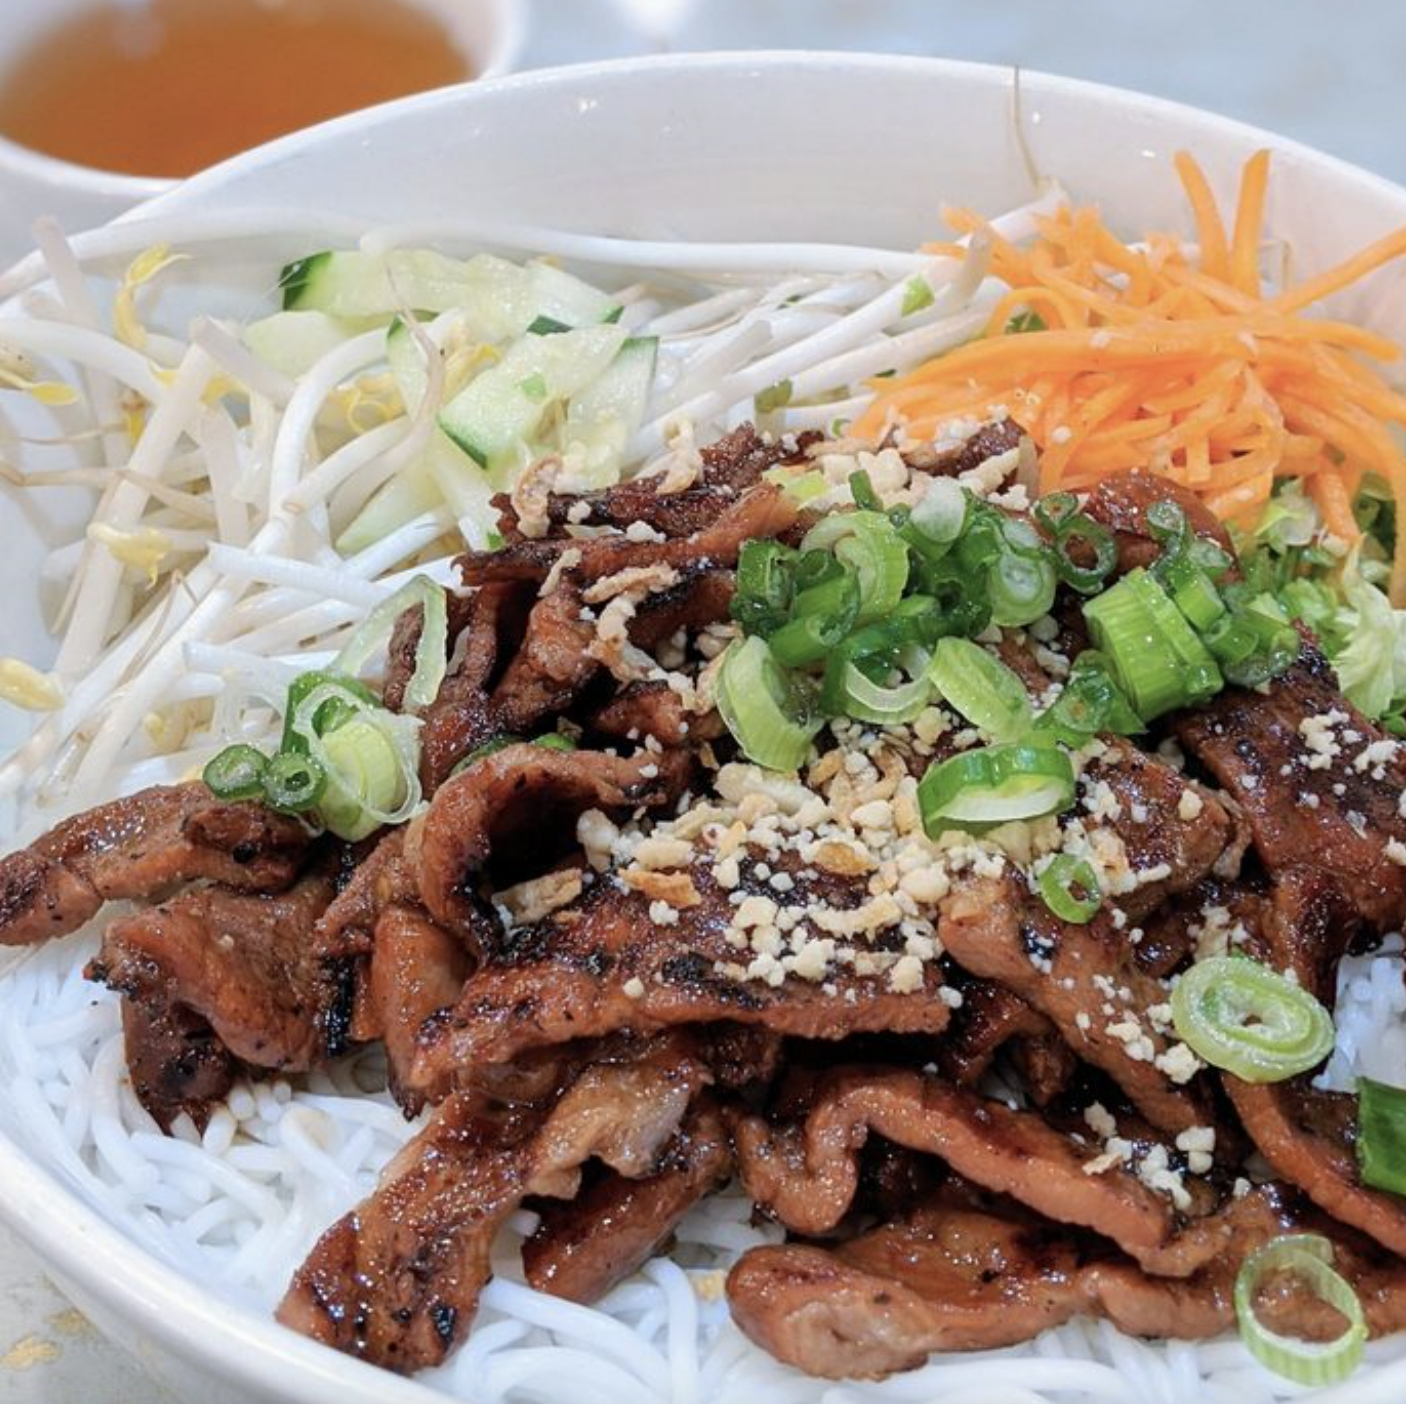 Vermicelli Noodles with Grilled Pork